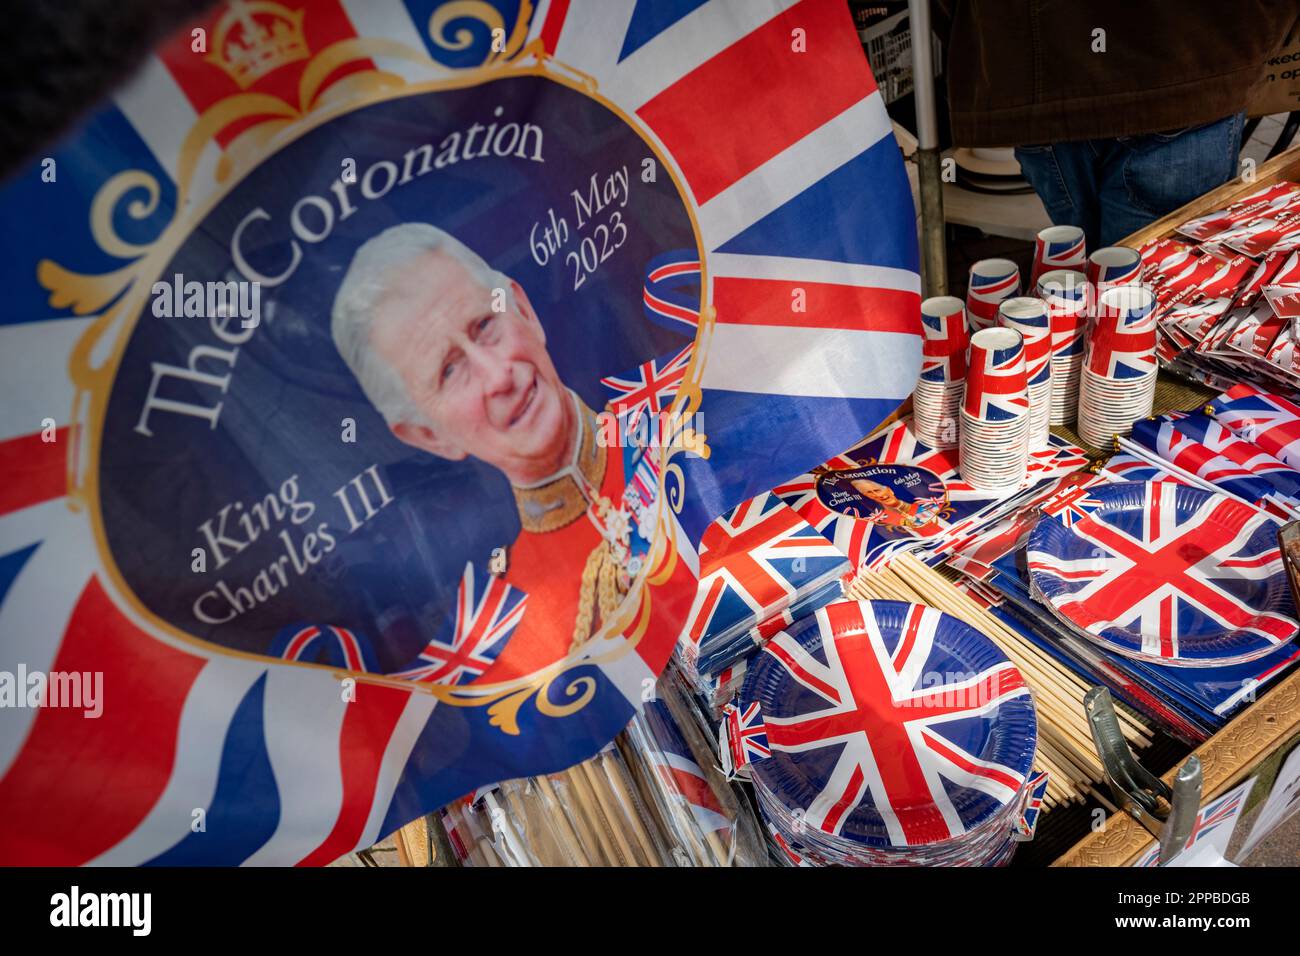 King Charles III Coronation Memorabilia on sale April-May 2023 Commemorative Coronation Flags and bunting for sale prior to the Coronation on on a Saf Stock Photo